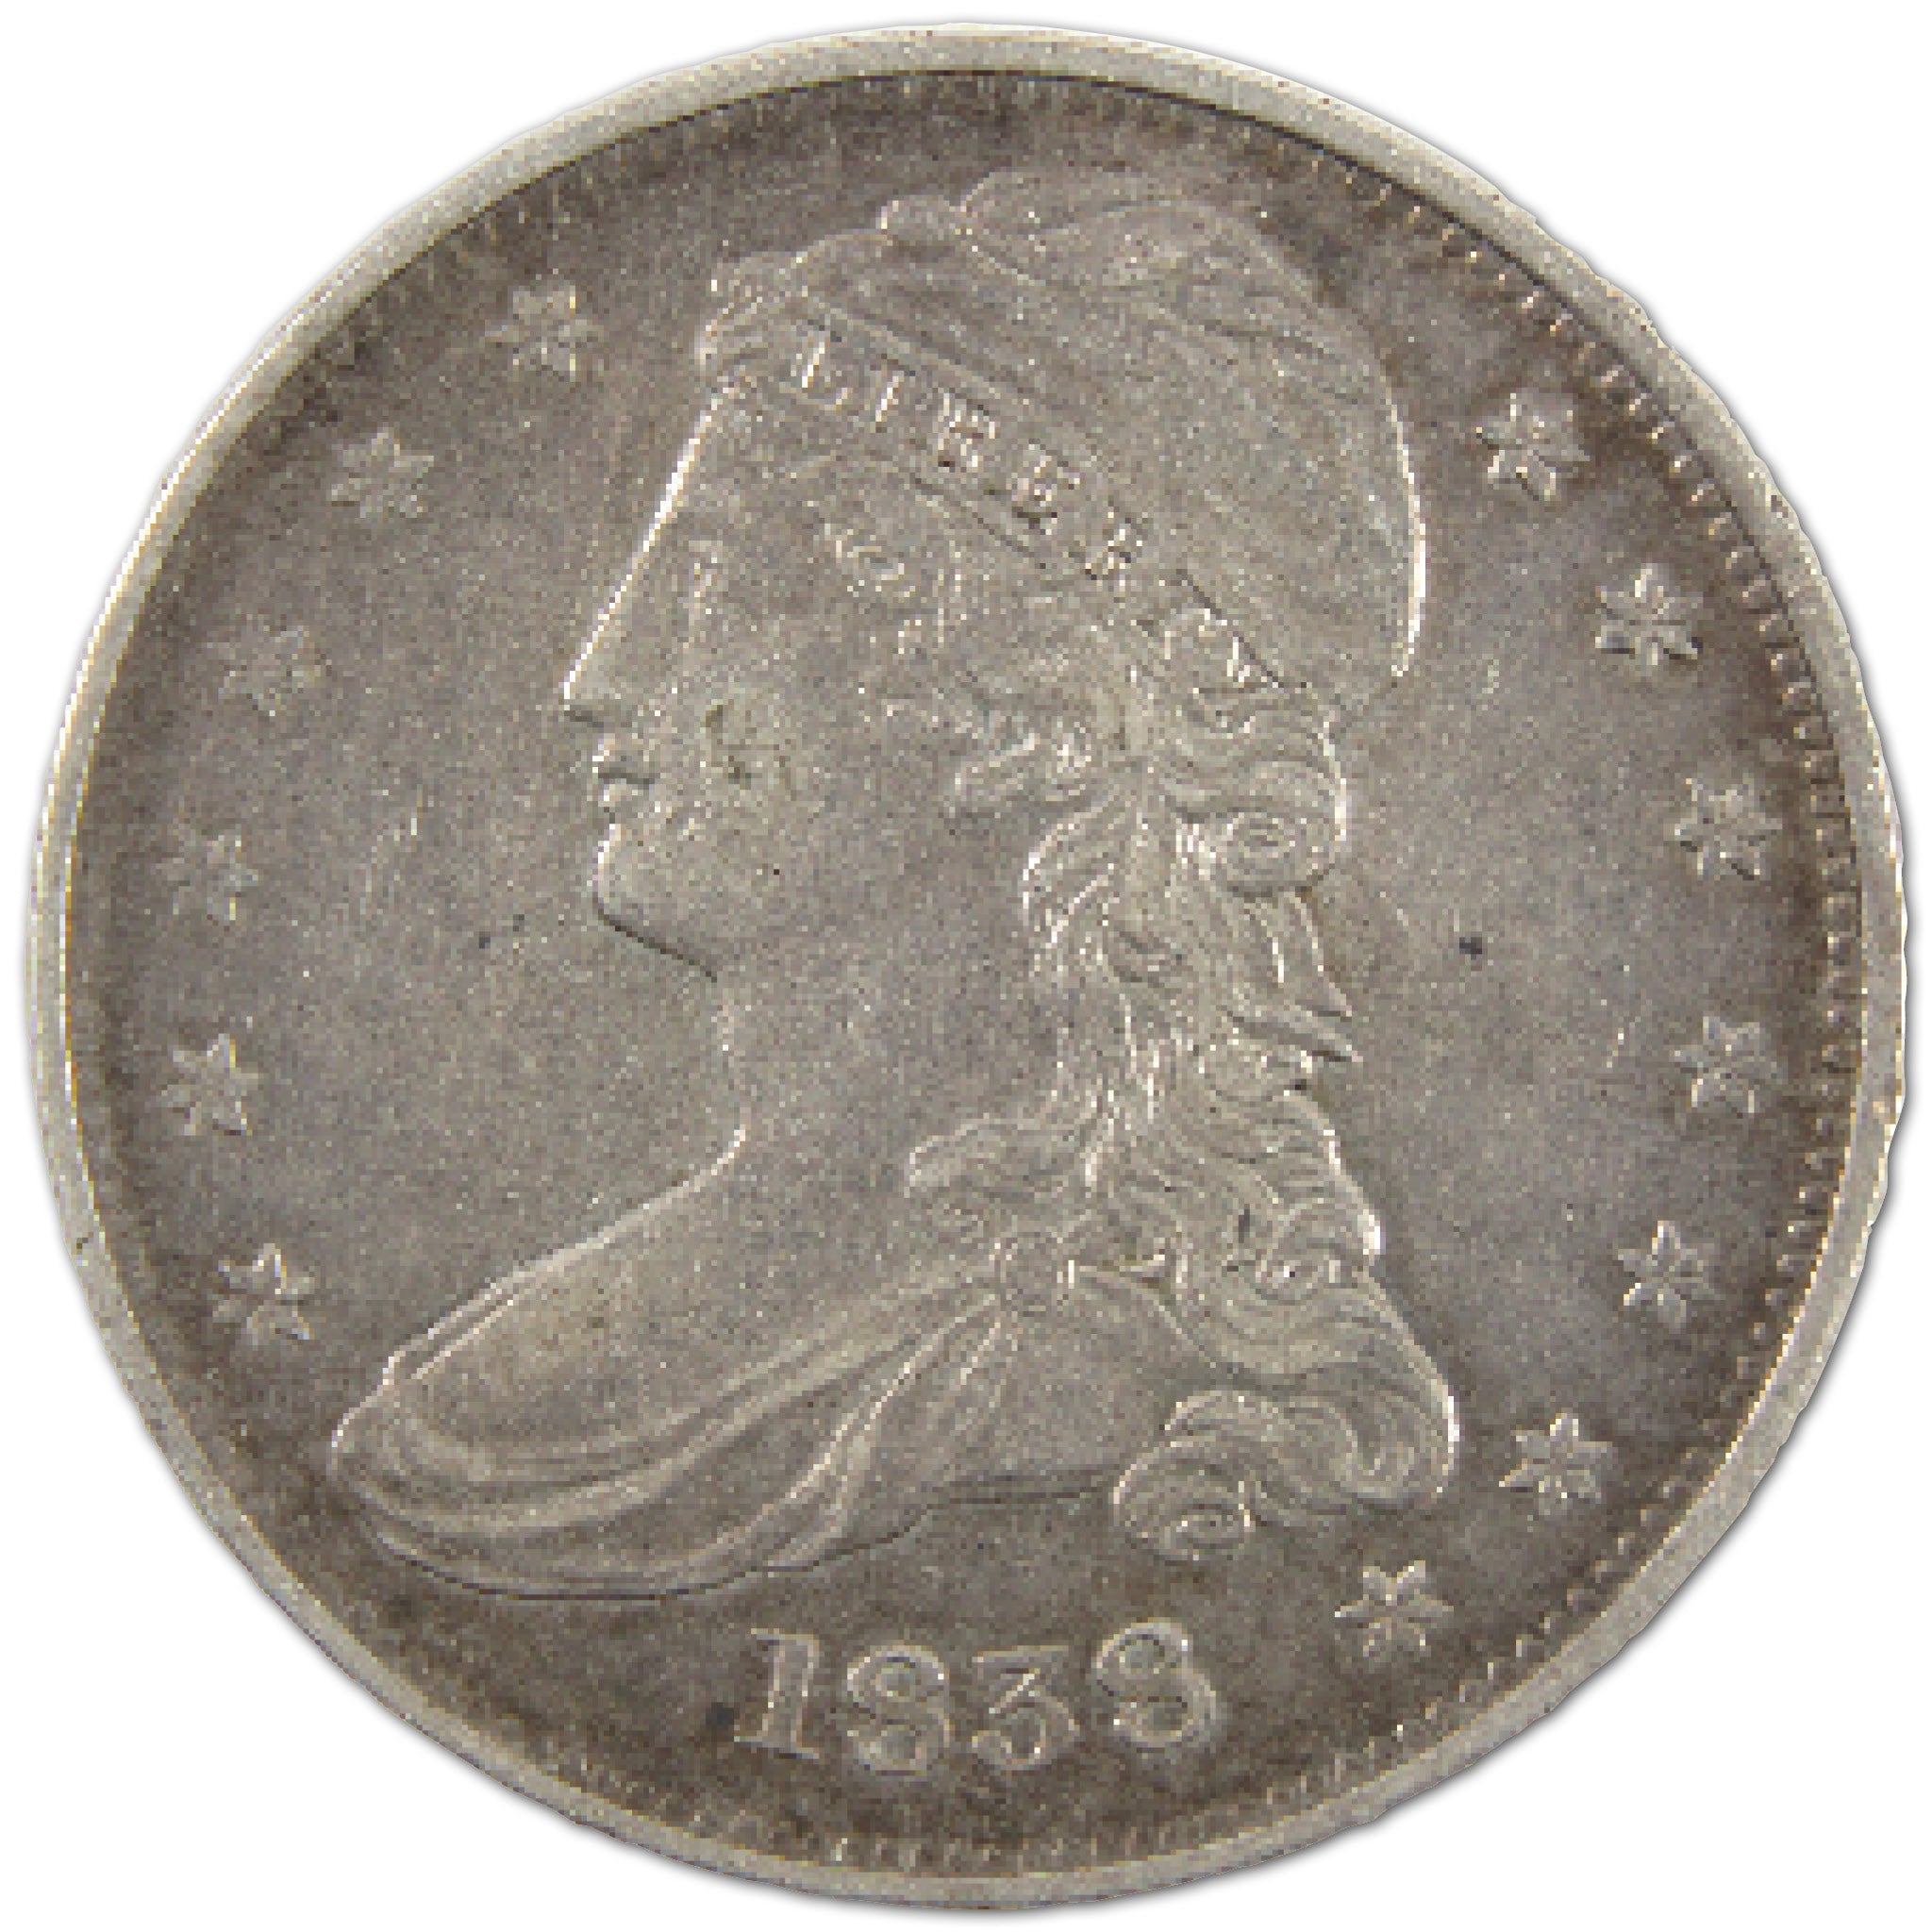 1838 Capped Bust Half Dollar XF Details Silver 50c Coin SKU:I10911